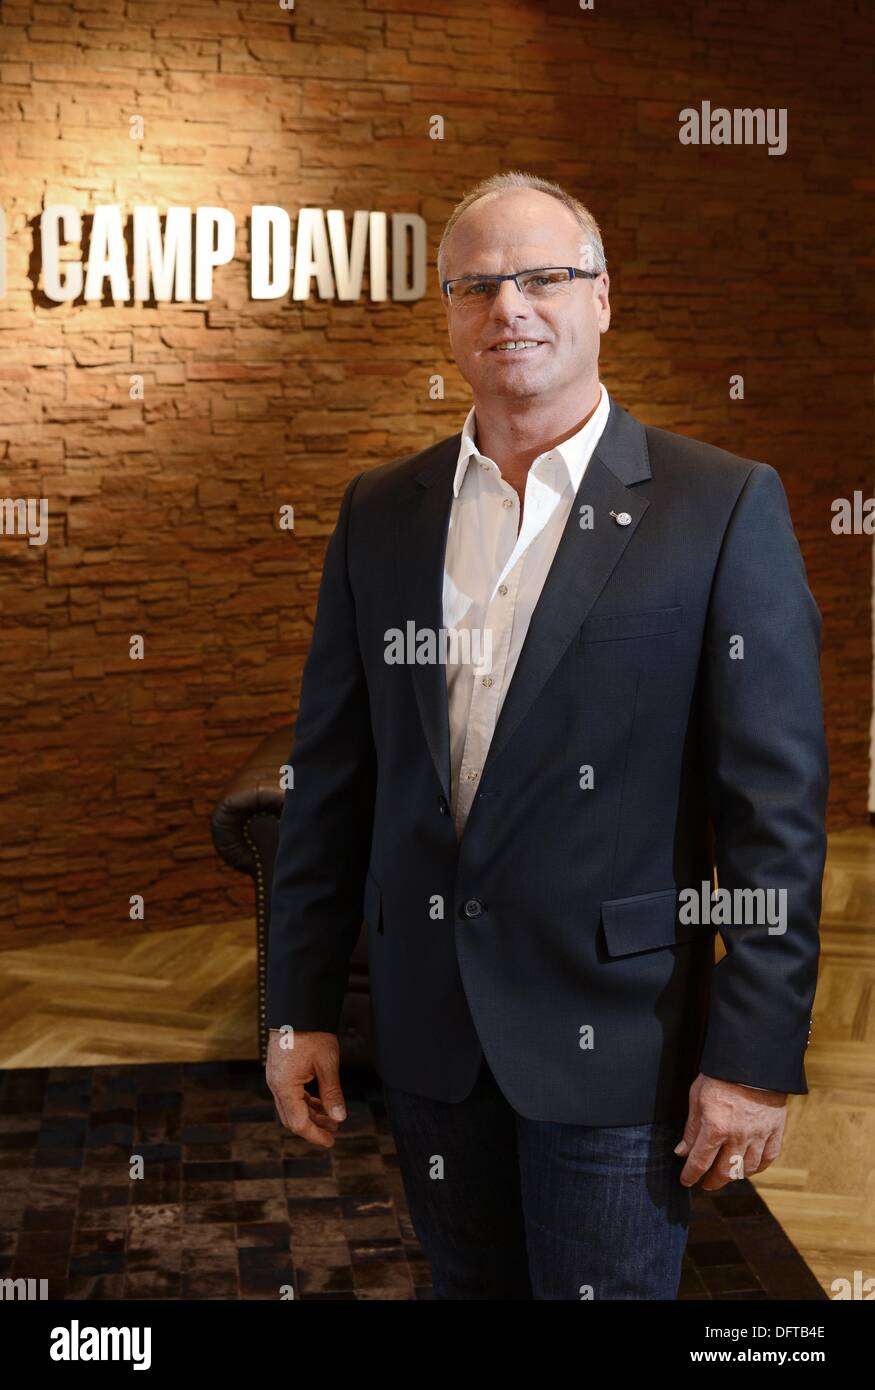 Hoppegarten, Germany. 13th Sep, 2013. dpa-exclusive - Thomas Finkbeiner,  manager of the Clinton Grosshandels GmbH (with labels including Camp David  and Soccx) is photographed at company headquarters in Hoppegarten, Germany,  13 September